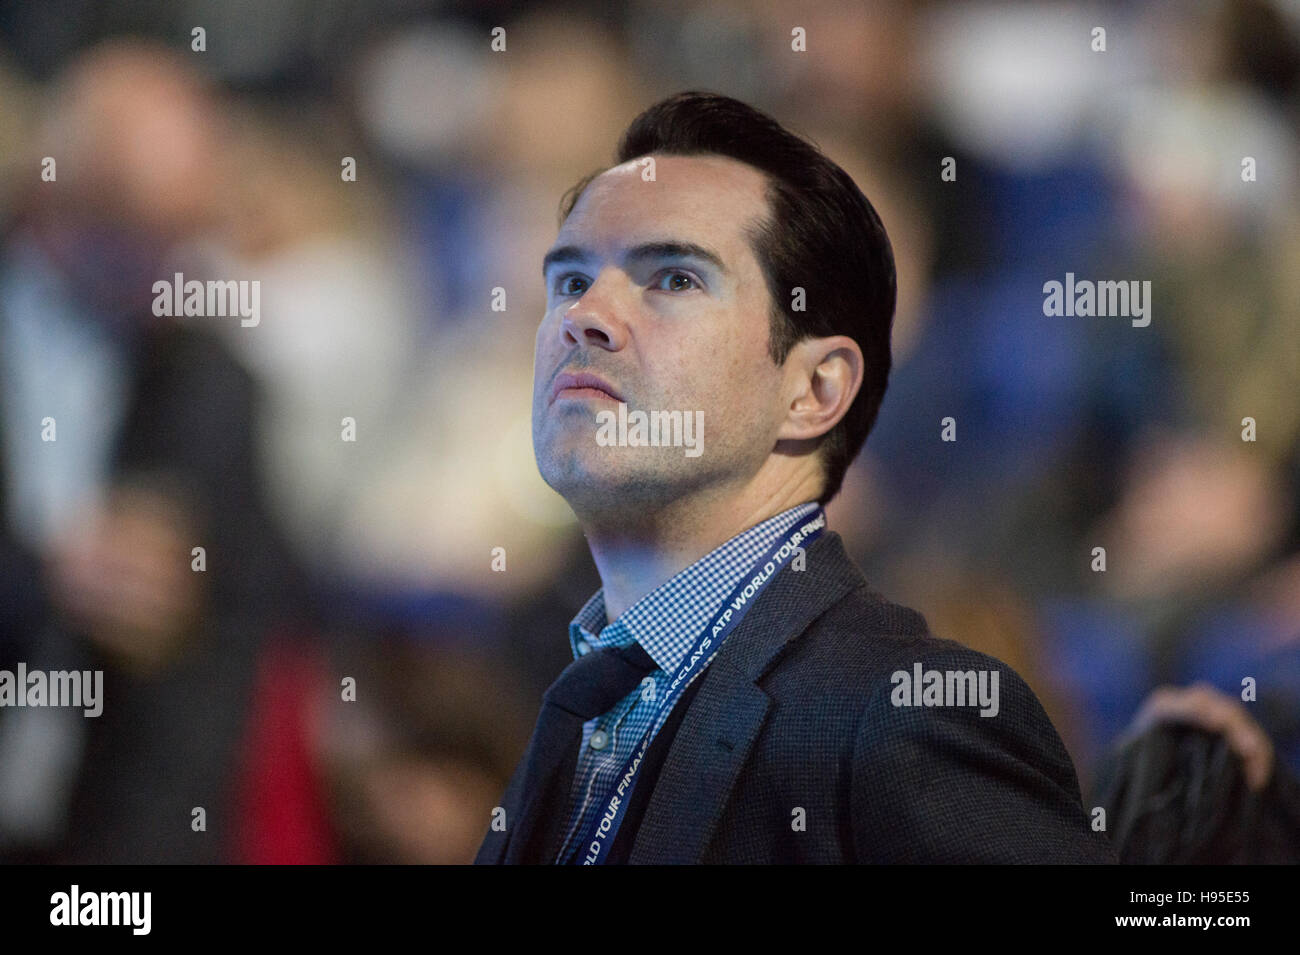 The O2, London, UK. 19th November, 2016. Day 7 singles semi-final match, Andy Murray (GBR) defeats Milos Raonic (CAN) in the longest best-of-three set matches at 3hrs 38mins in the ATP World Tour Finals since 1991 when times were first recorded. Jimmy Carr watching the match. Murray previously completed the longest match defeating Nishikori on 16th November, Day 4, taking 3hrs 20mins.  Credit:  sportsimages/Alamy Live News. Stock Photo